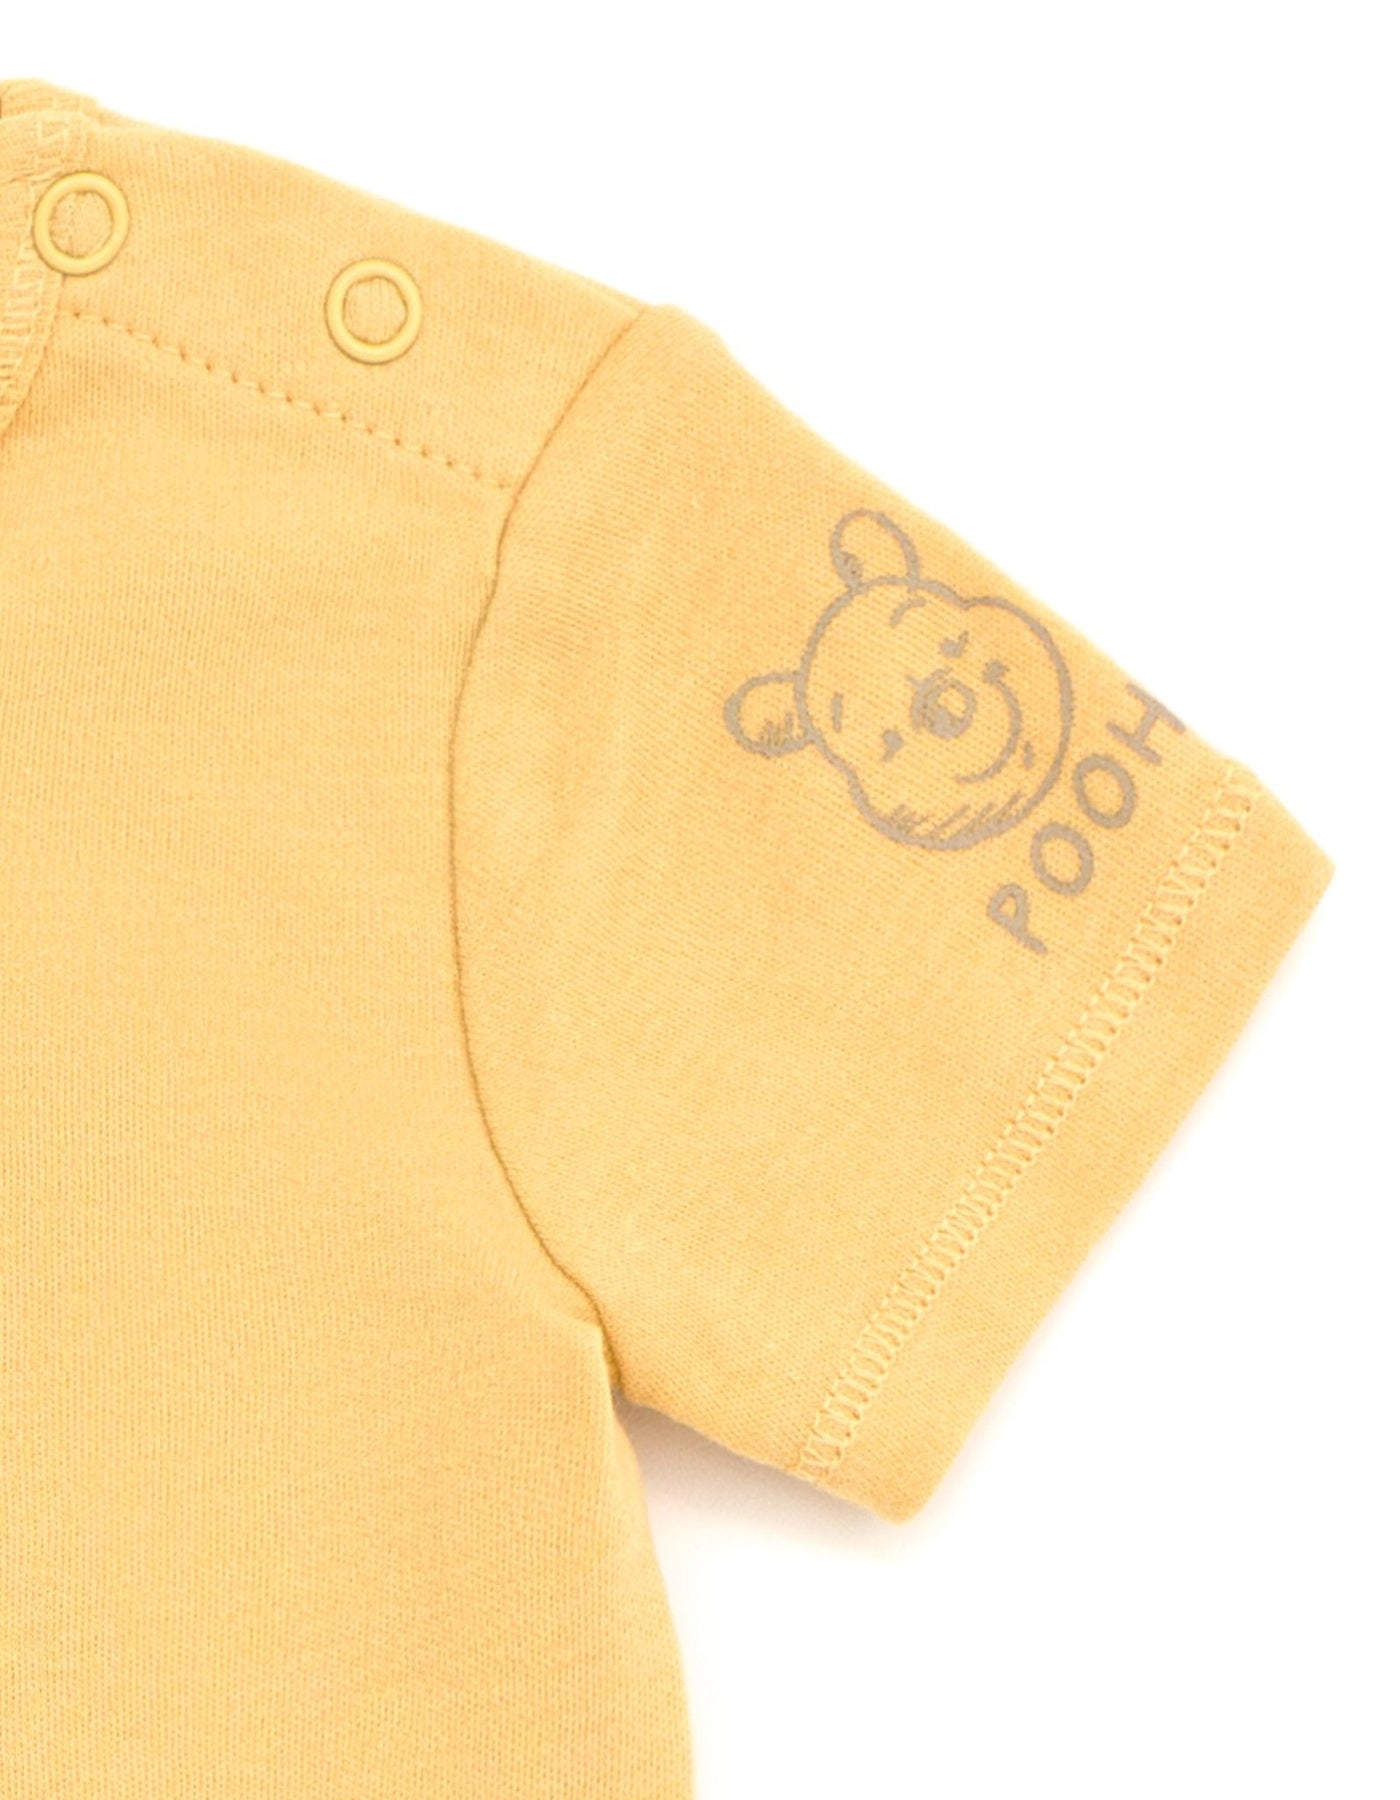 Disney Winnie the Pooh Bodysuit and Short Overalls Outfit Set - imagikids